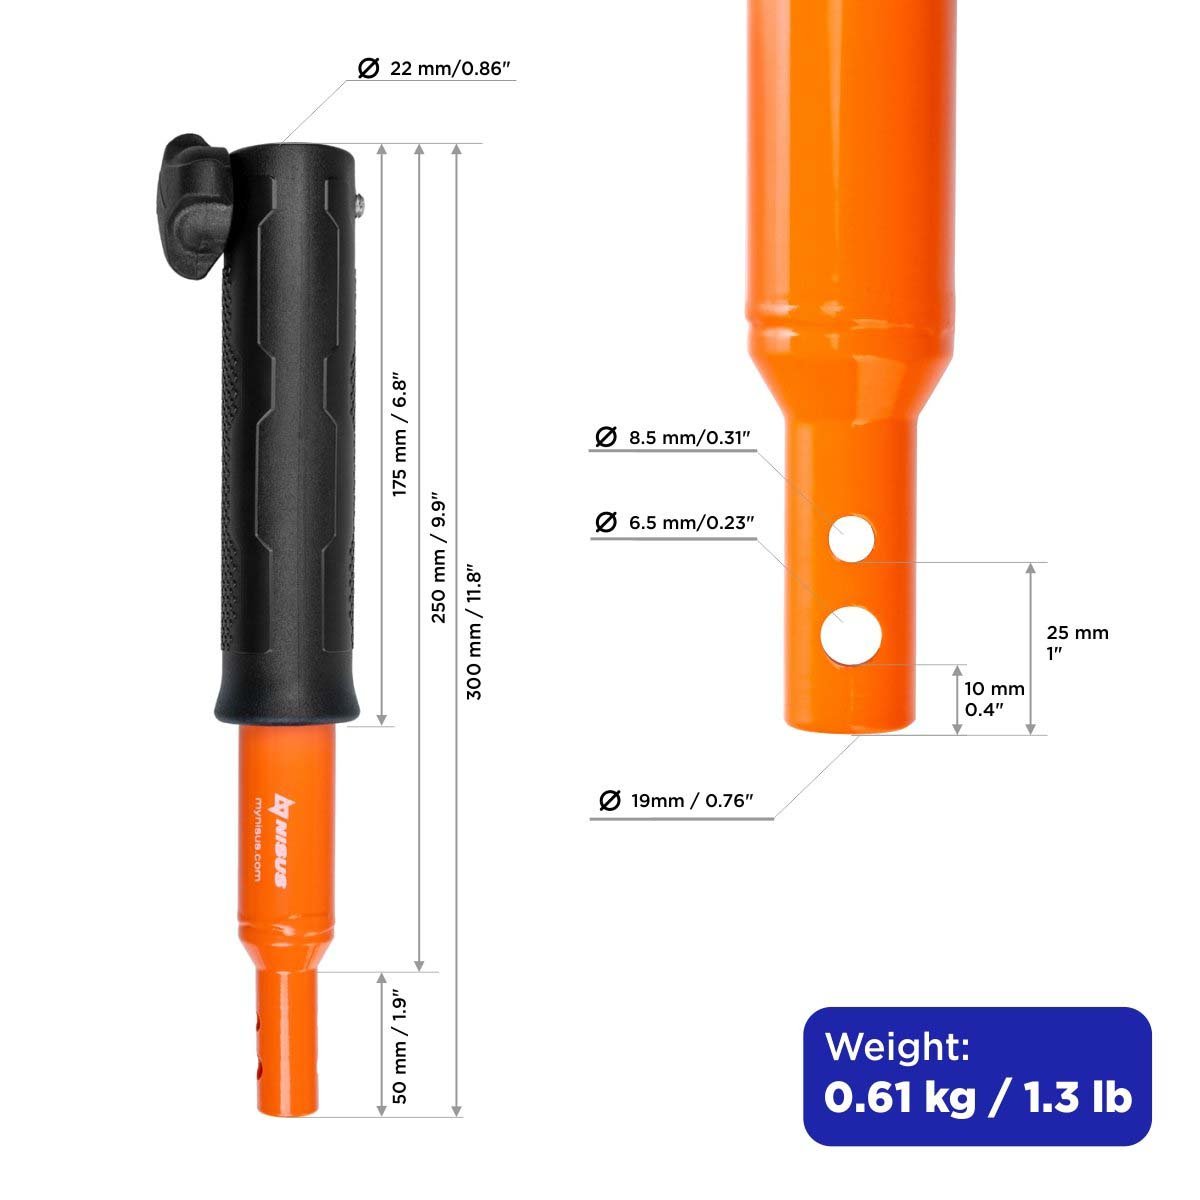 Motoshtorm Power Auger Drill Bit Extension is up to 12 Inches long and weighs 1.3 lbs